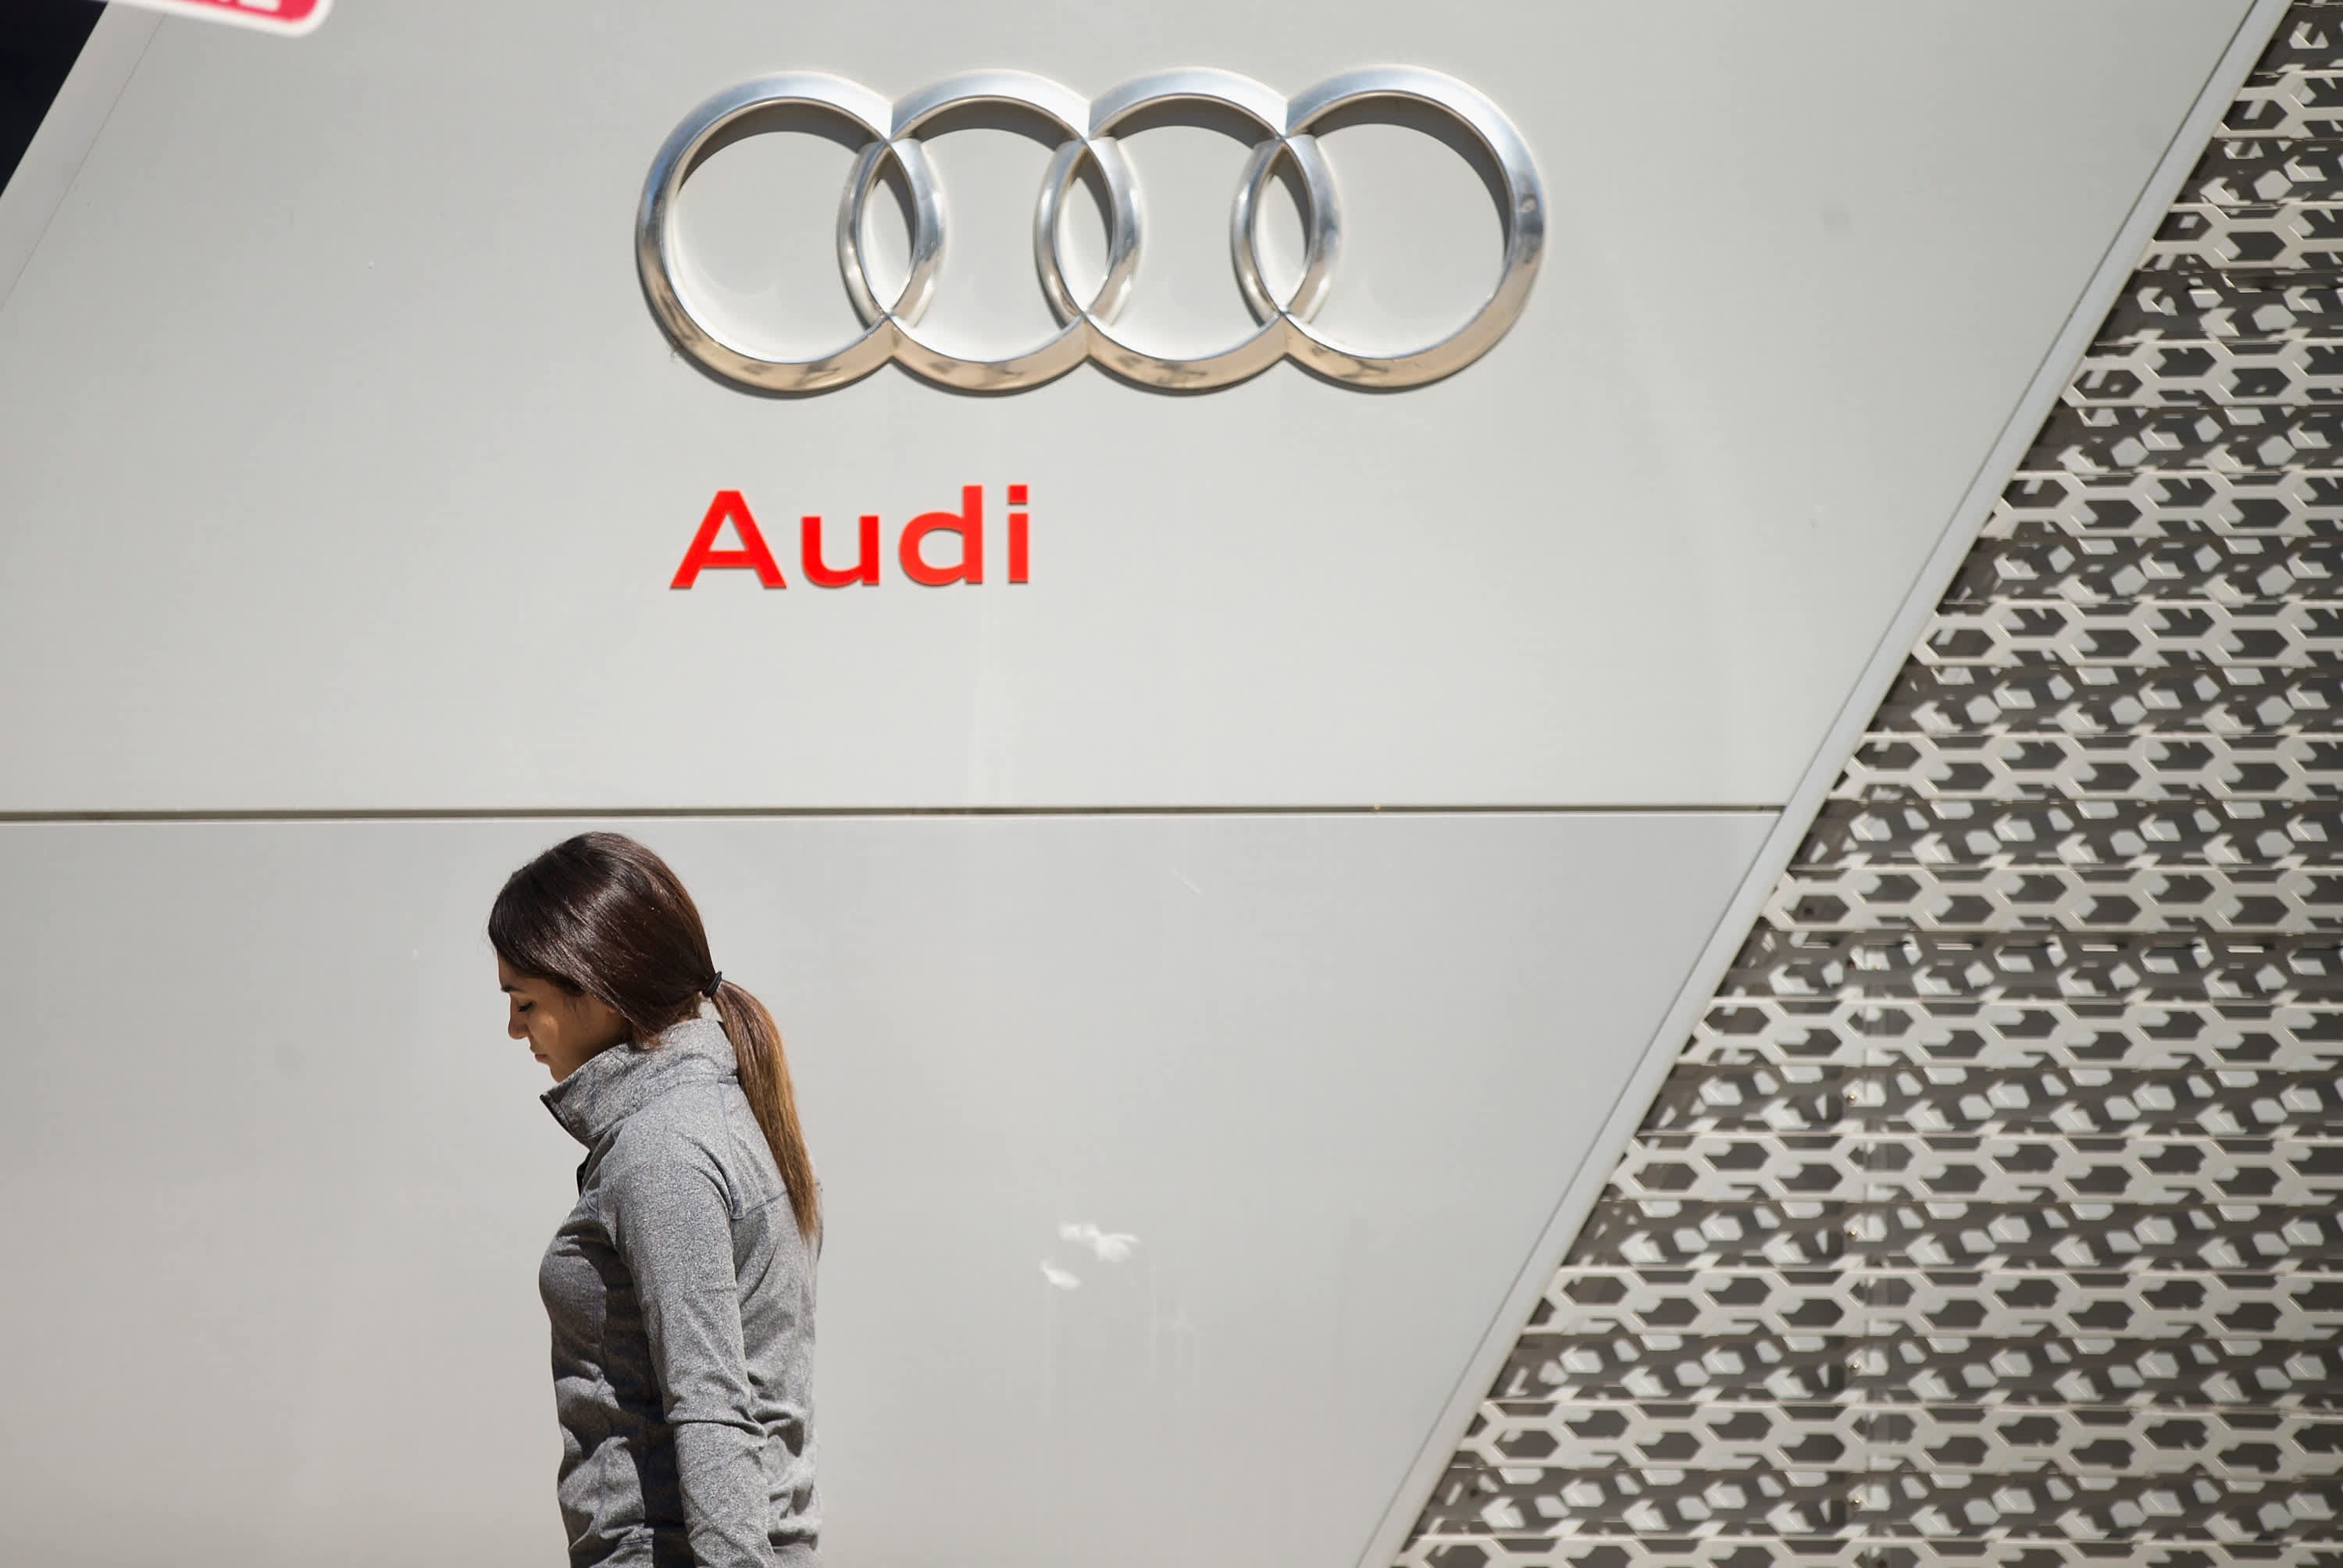 VW's Audi to cut one in 10 jobs to fund shift to electric vehicles